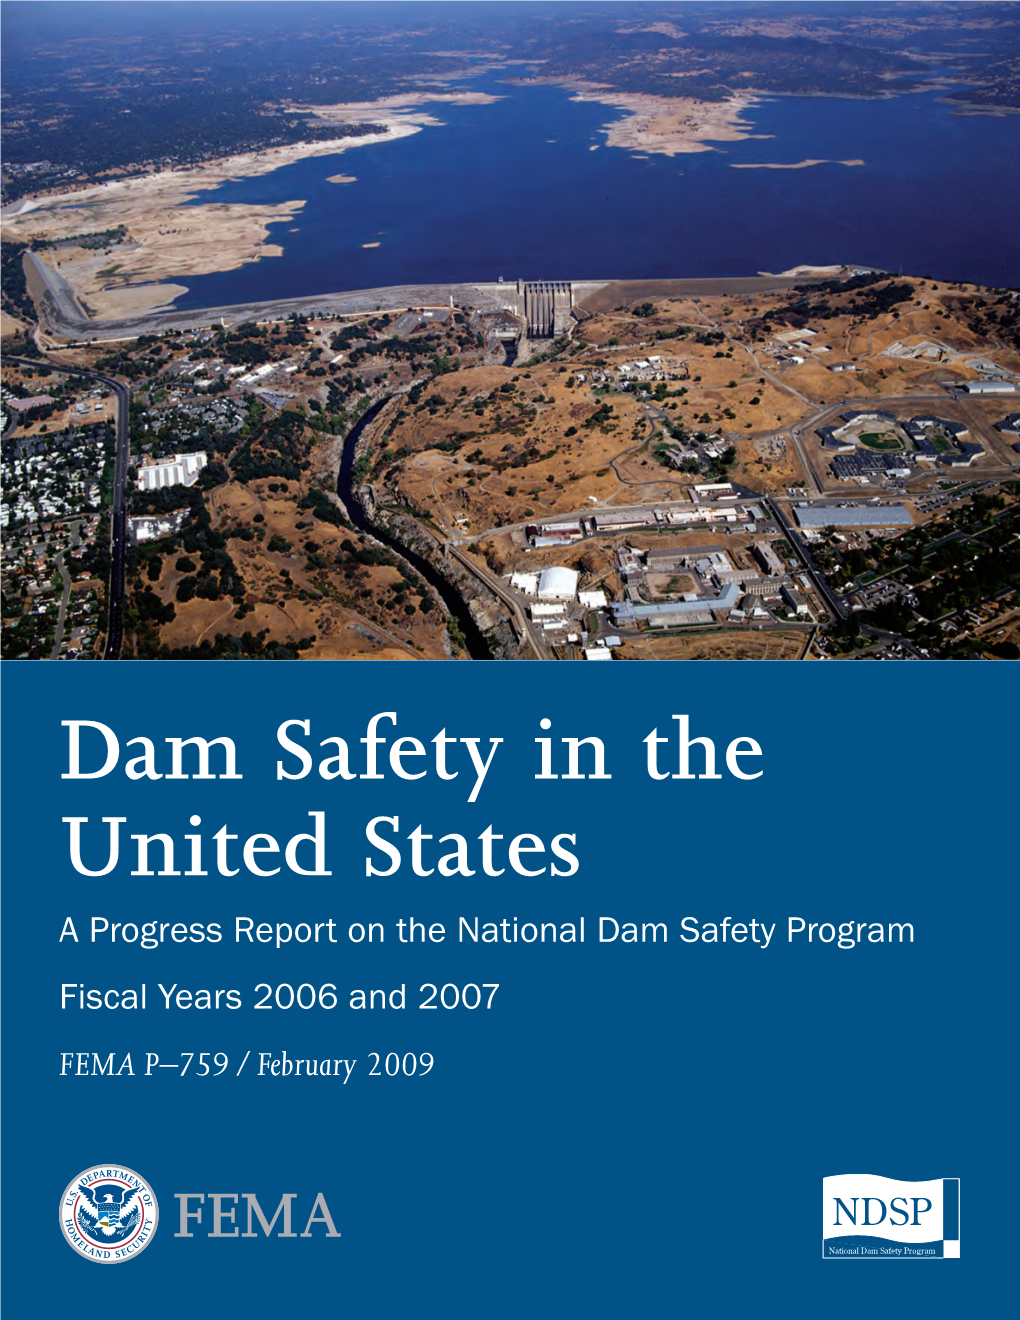 Dam Safety in the United States: a Progress Report on the National